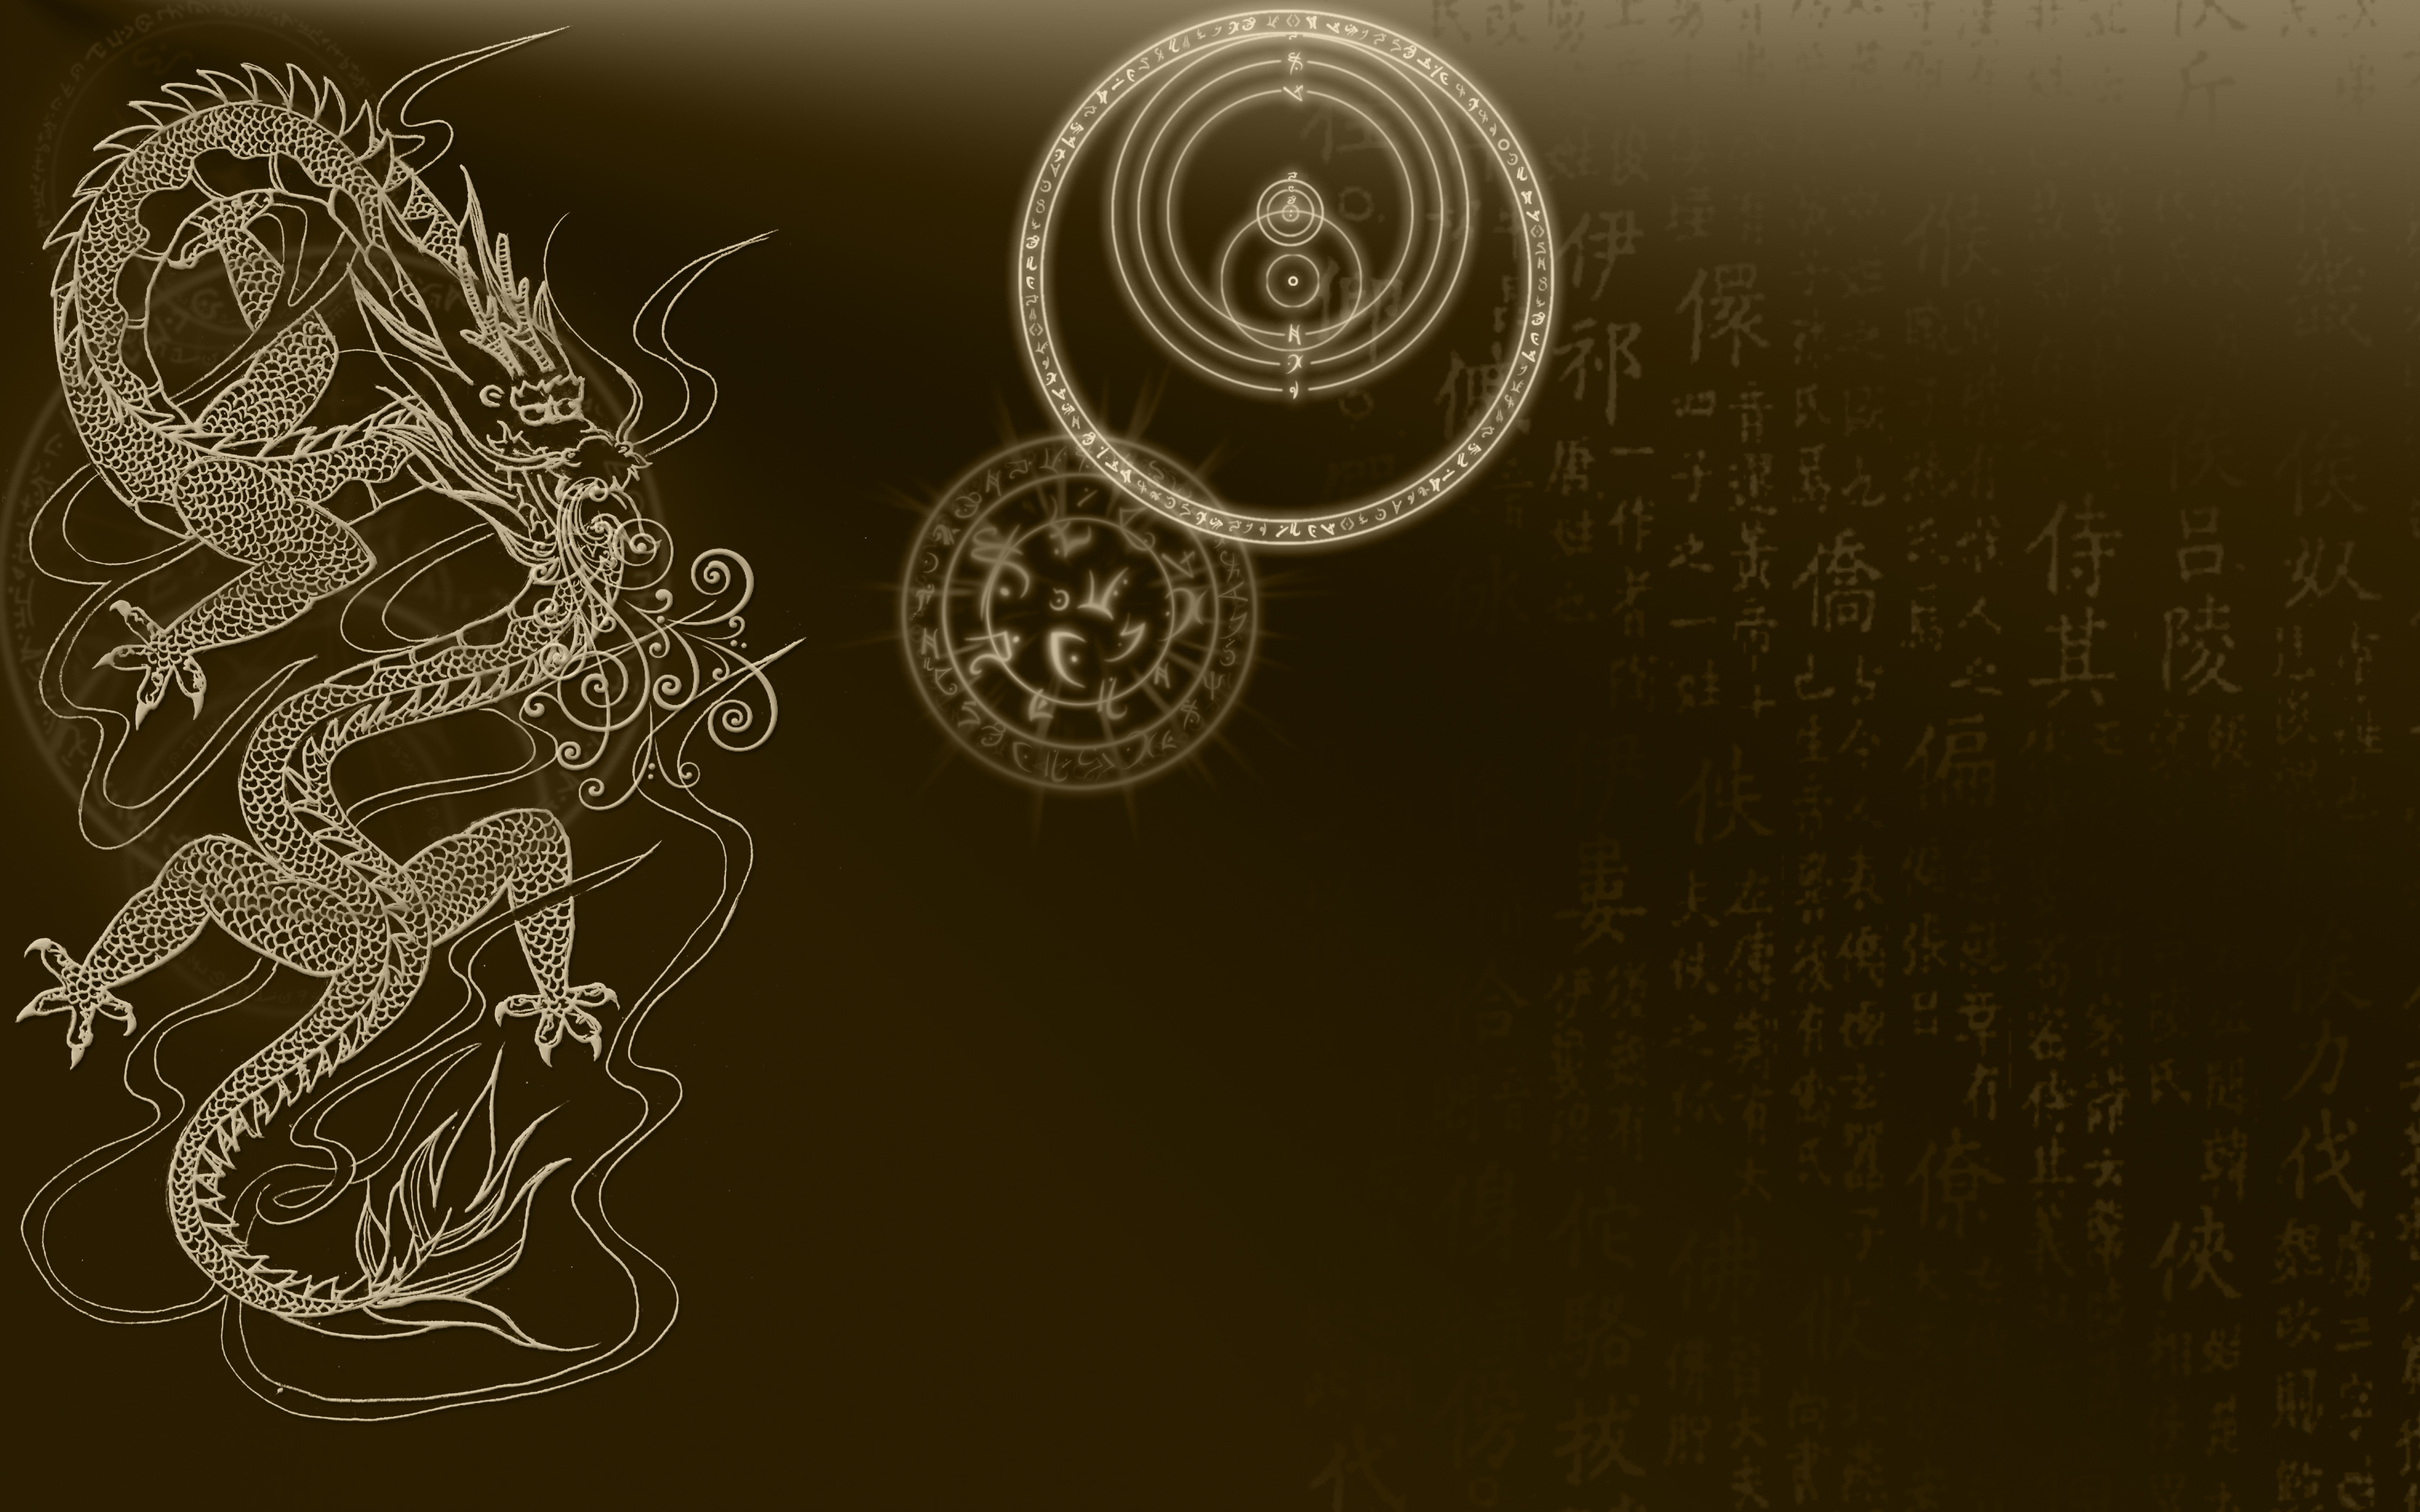 Chinese Dragons wallpapers Chinese Dragons background 3360x2100